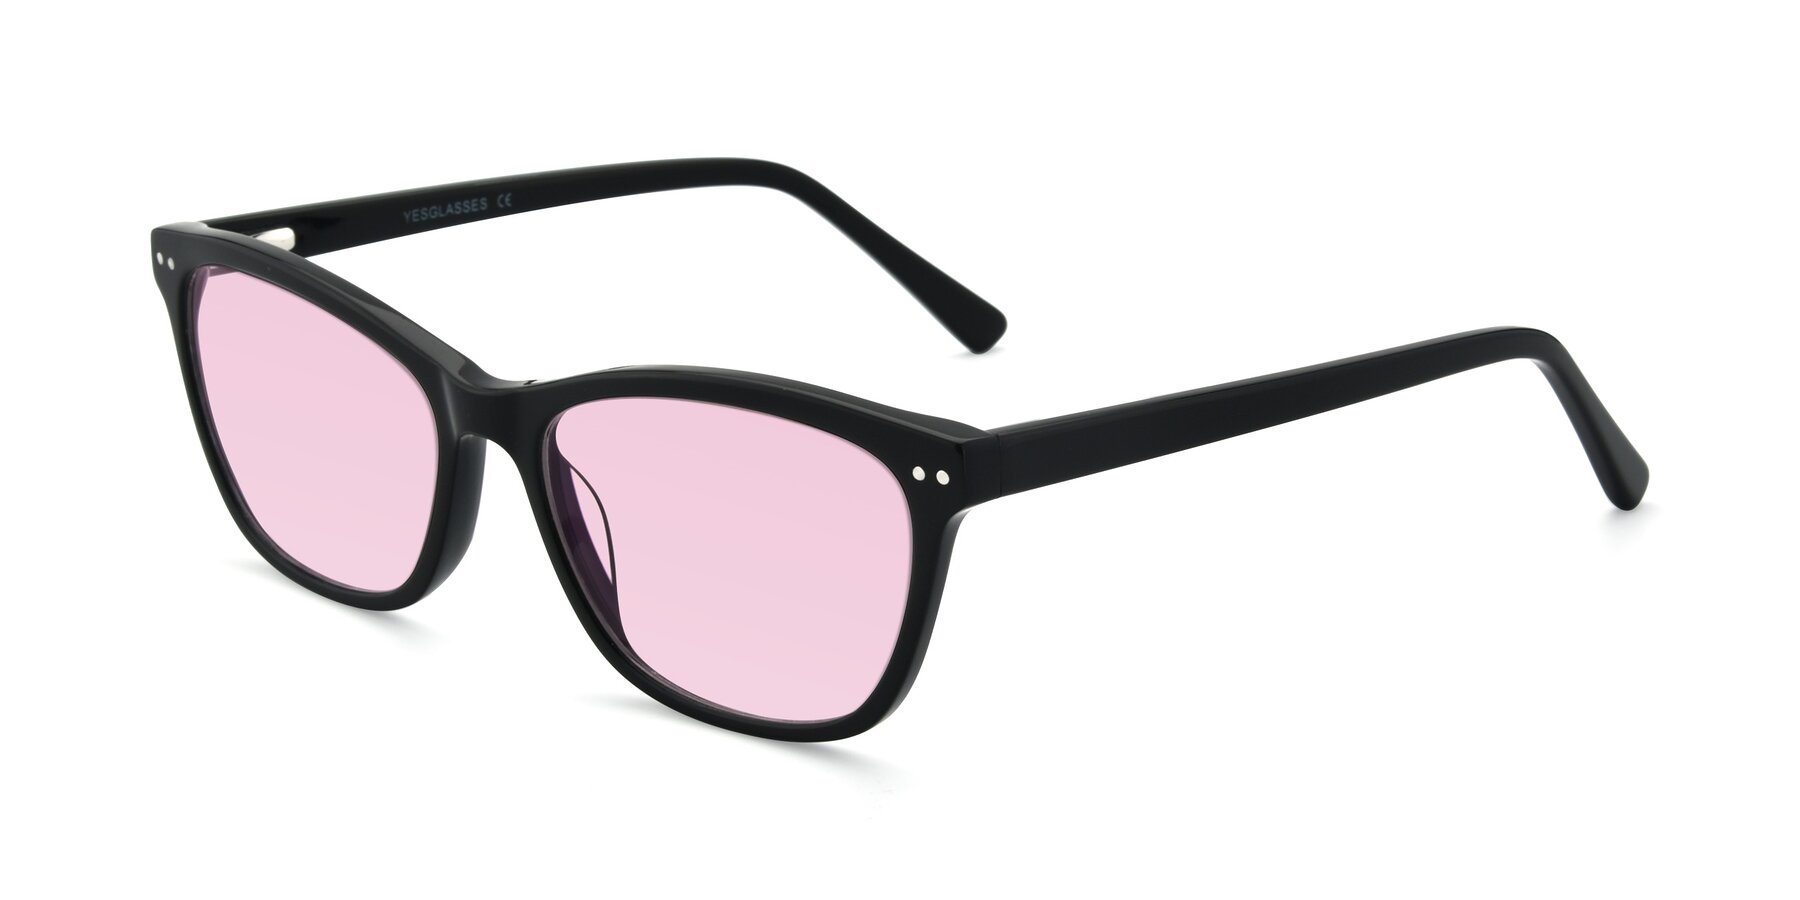 Angle of 17350 in Black with Light Pink Tinted Lenses